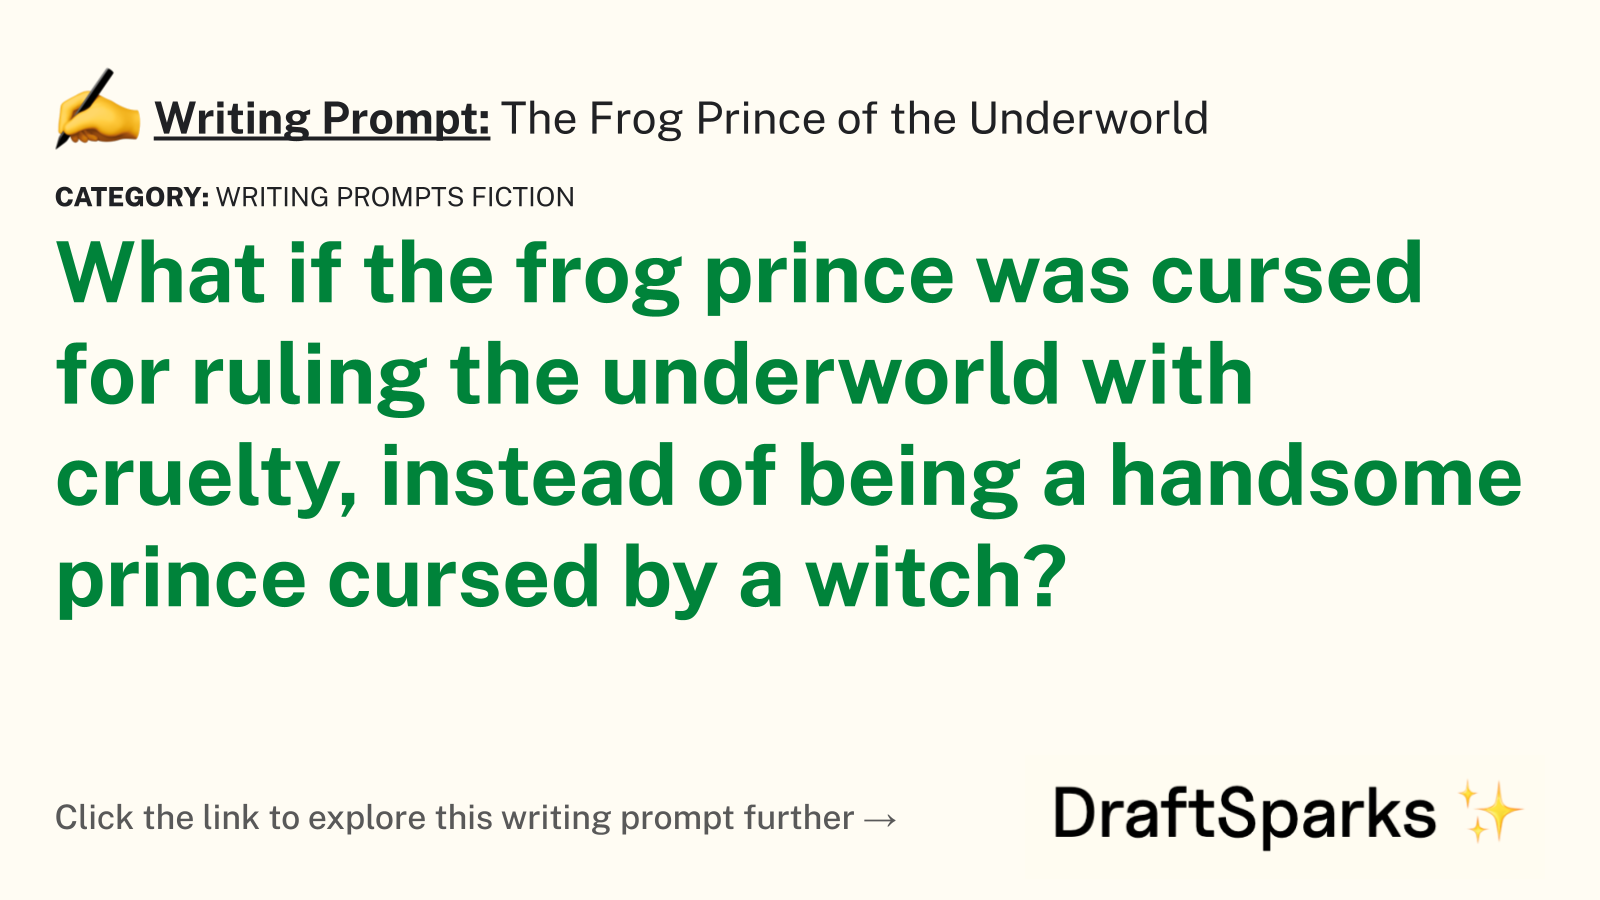 The Frog Prince of the Underworld